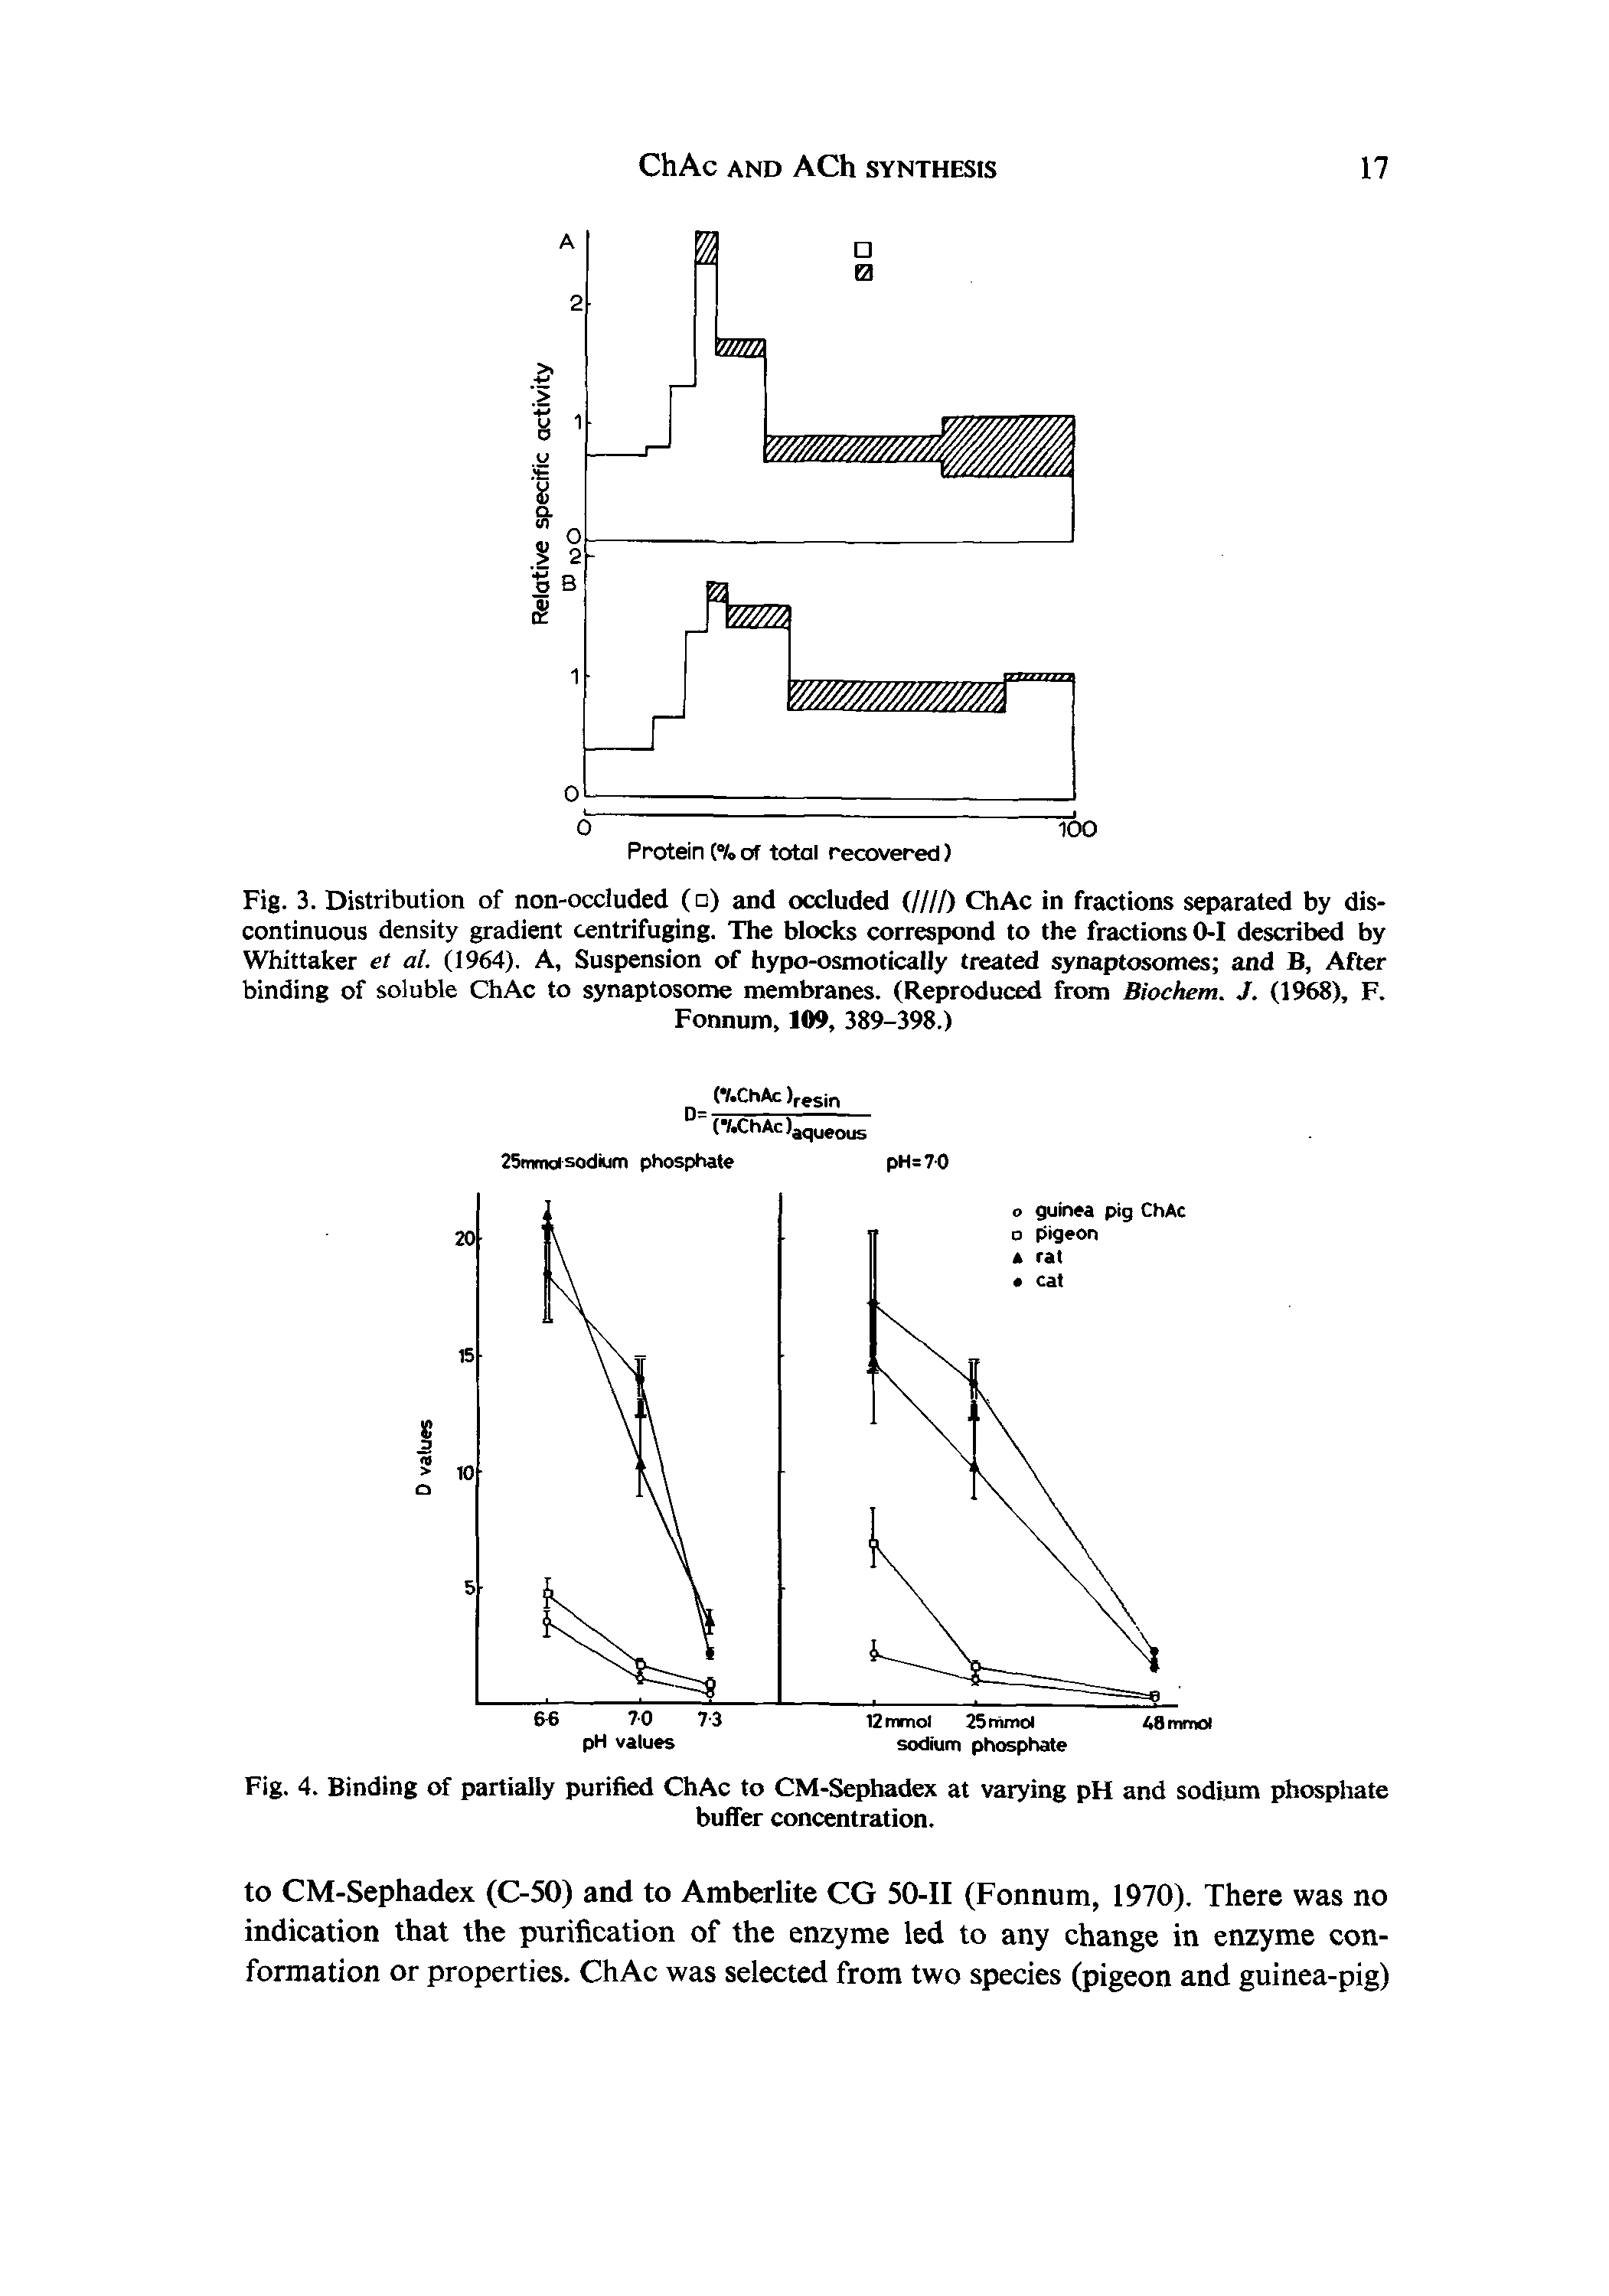 Fig. 3. Distribution of non-occluded ( ) and occluded ill ID ChAc in fractions separated by discontinuous density gradient centrifuging. The blocks correspond to the fractions 0-1 described by Whittaker et at. (1964). A, Suspension of hypo-osmotically treated synaptosomes and B, After binding of soluble ChAc to synaptosome membranes. (Reproduced from Biochem. J. (1968), F.